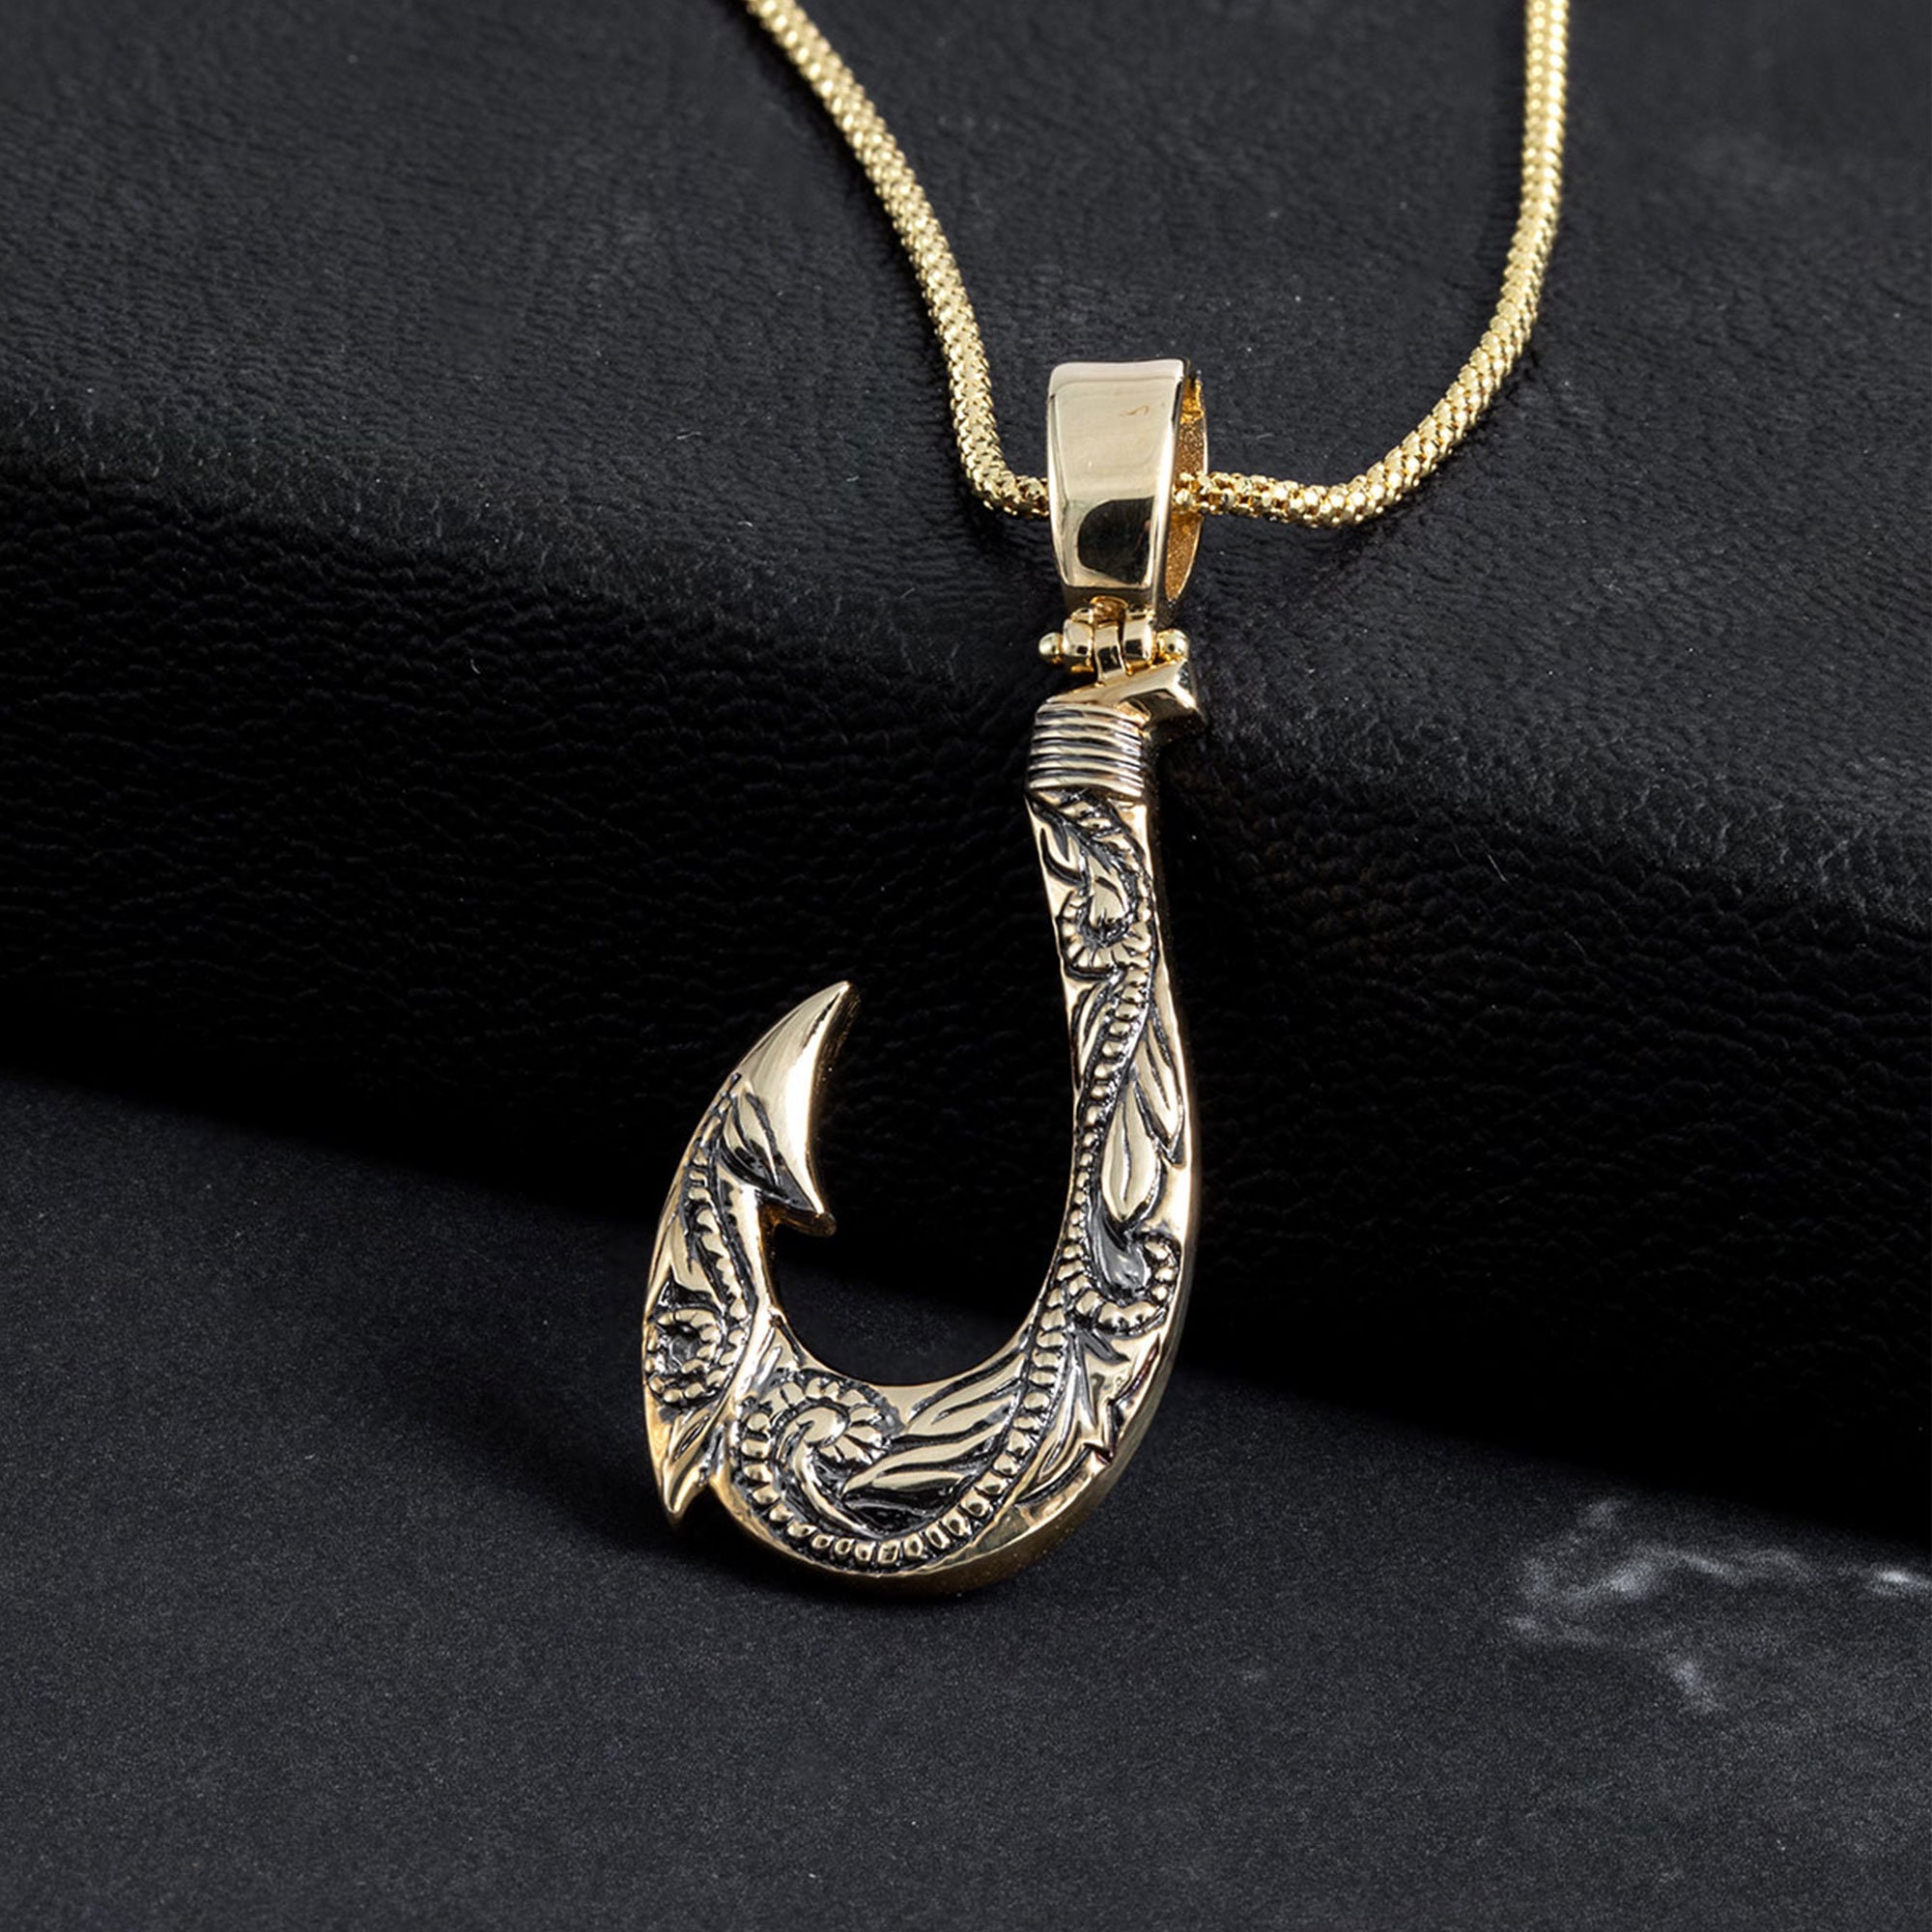 14K Solid Gold Fish Hook Necklace, 14k Yellow or Rose Gold, Handmade Fine Jewelry, Sailor Man's Pendant, Men Gold Necklace, Gift for Him